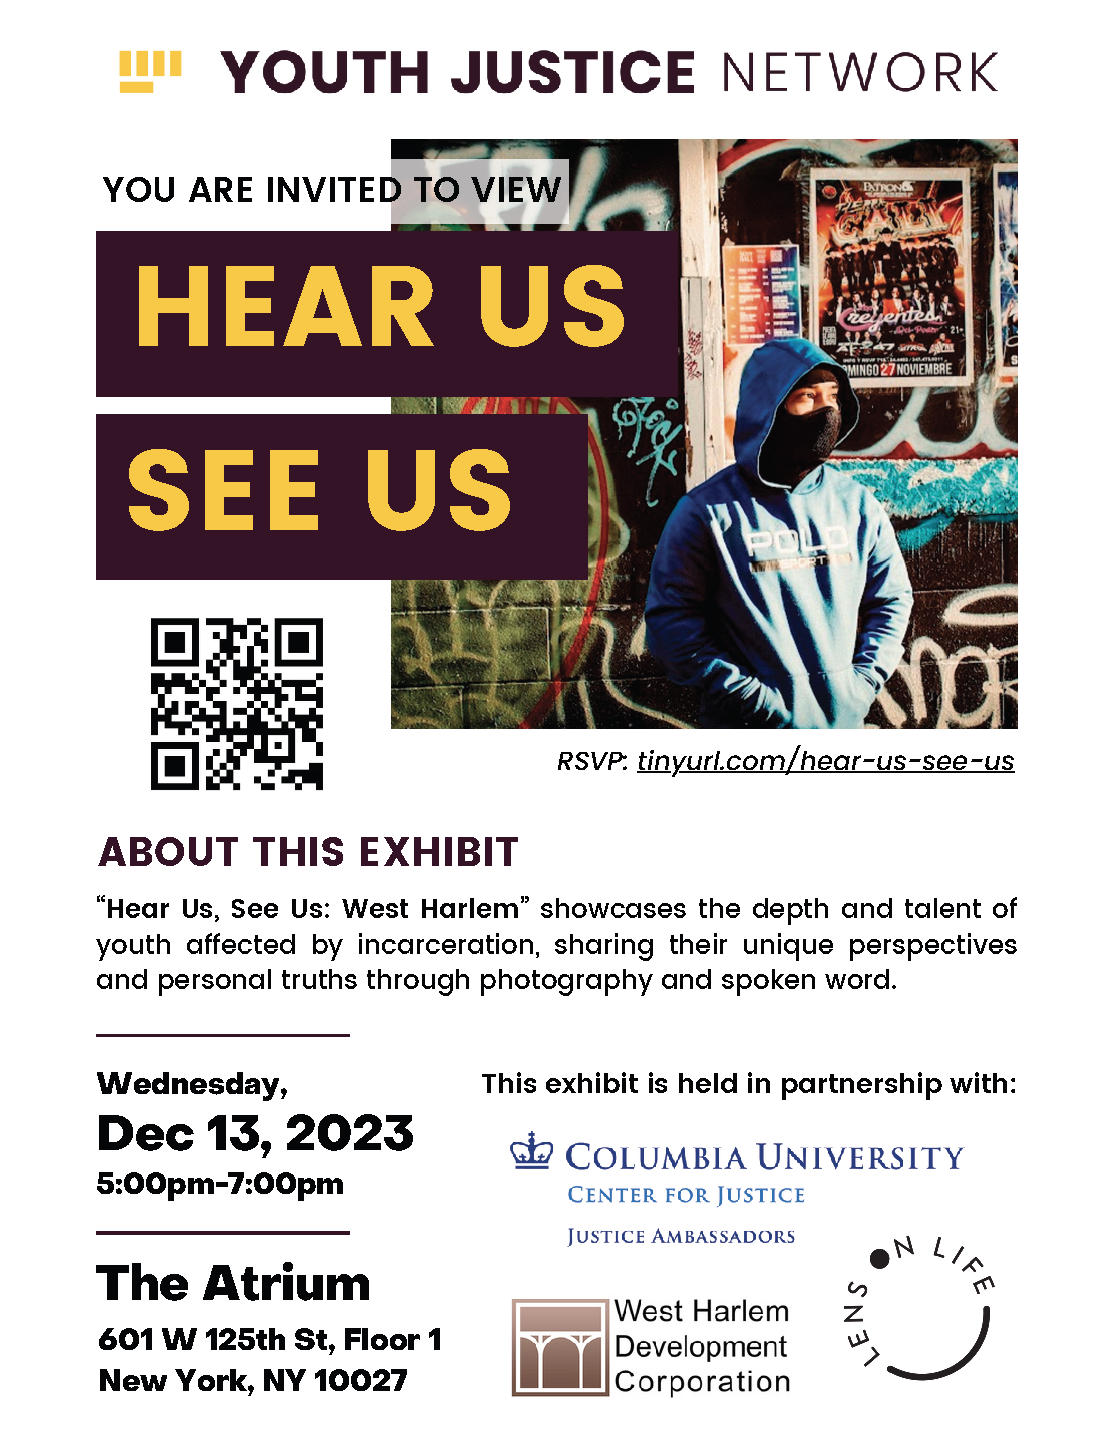 You are invited to view Hear Us, See Us. ABOUT THIS EXHIBIT: “Hear Us, See Us: West Harlem” showcases the depth and talent ofyouth affected by incarceration, sharing their unique perspectives and personal truths through photography and spoken word.  Wednesday, December 13, 5–7pm  The Atrium, 1st floor of the Forum, 601 W. 125th Street